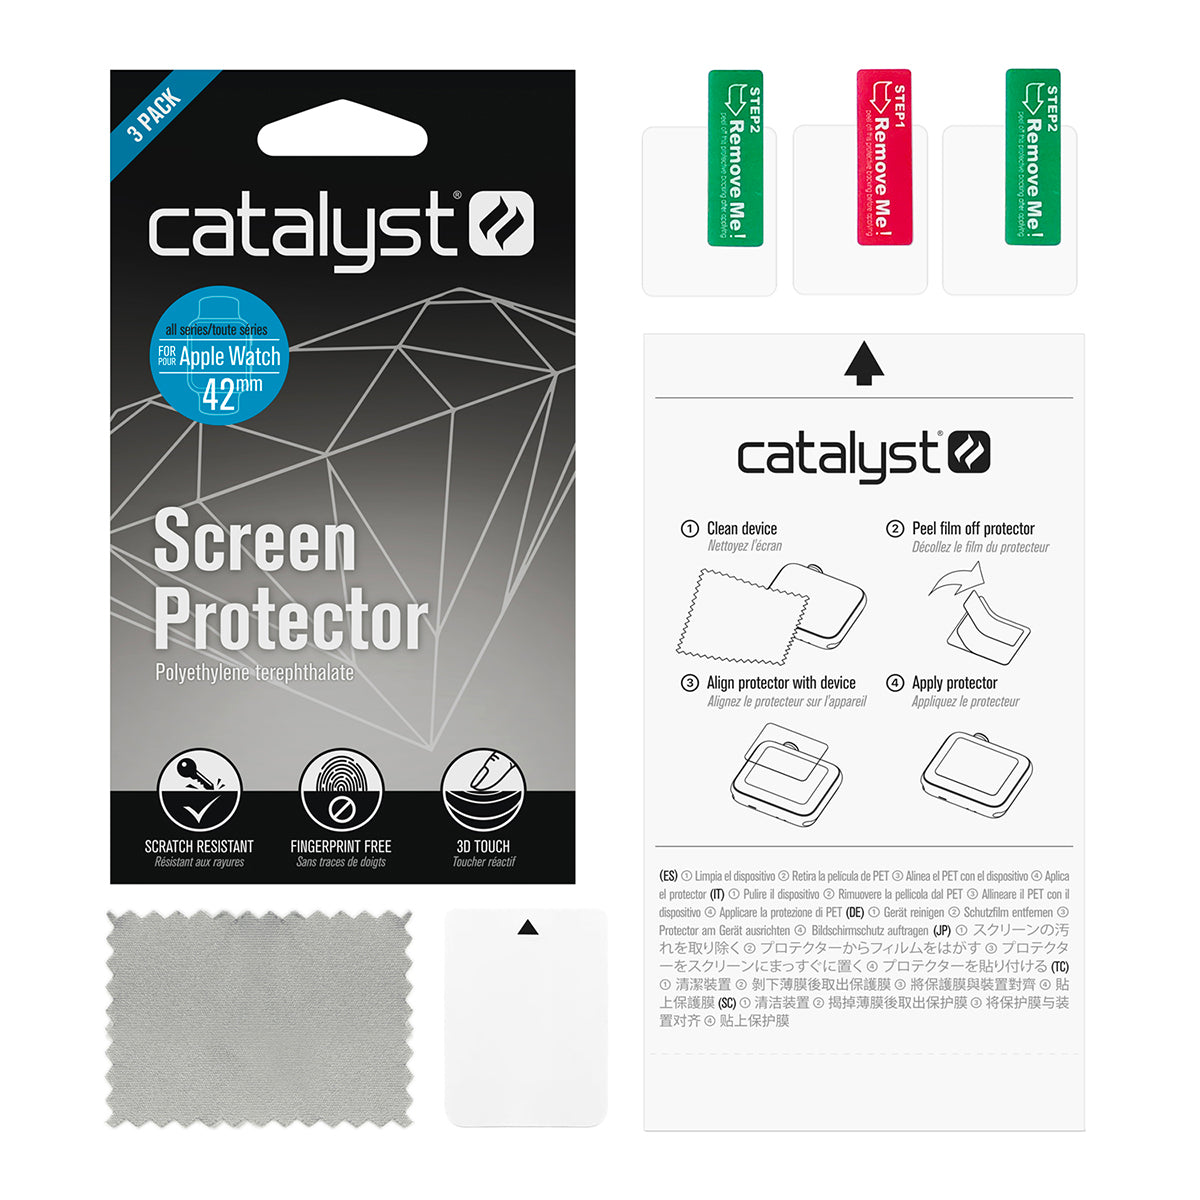 catalyst apple watch series 3 2 42mm impact protection case showing the packaging of the screen protector for apple watch microfiber cloth user manual screen protector